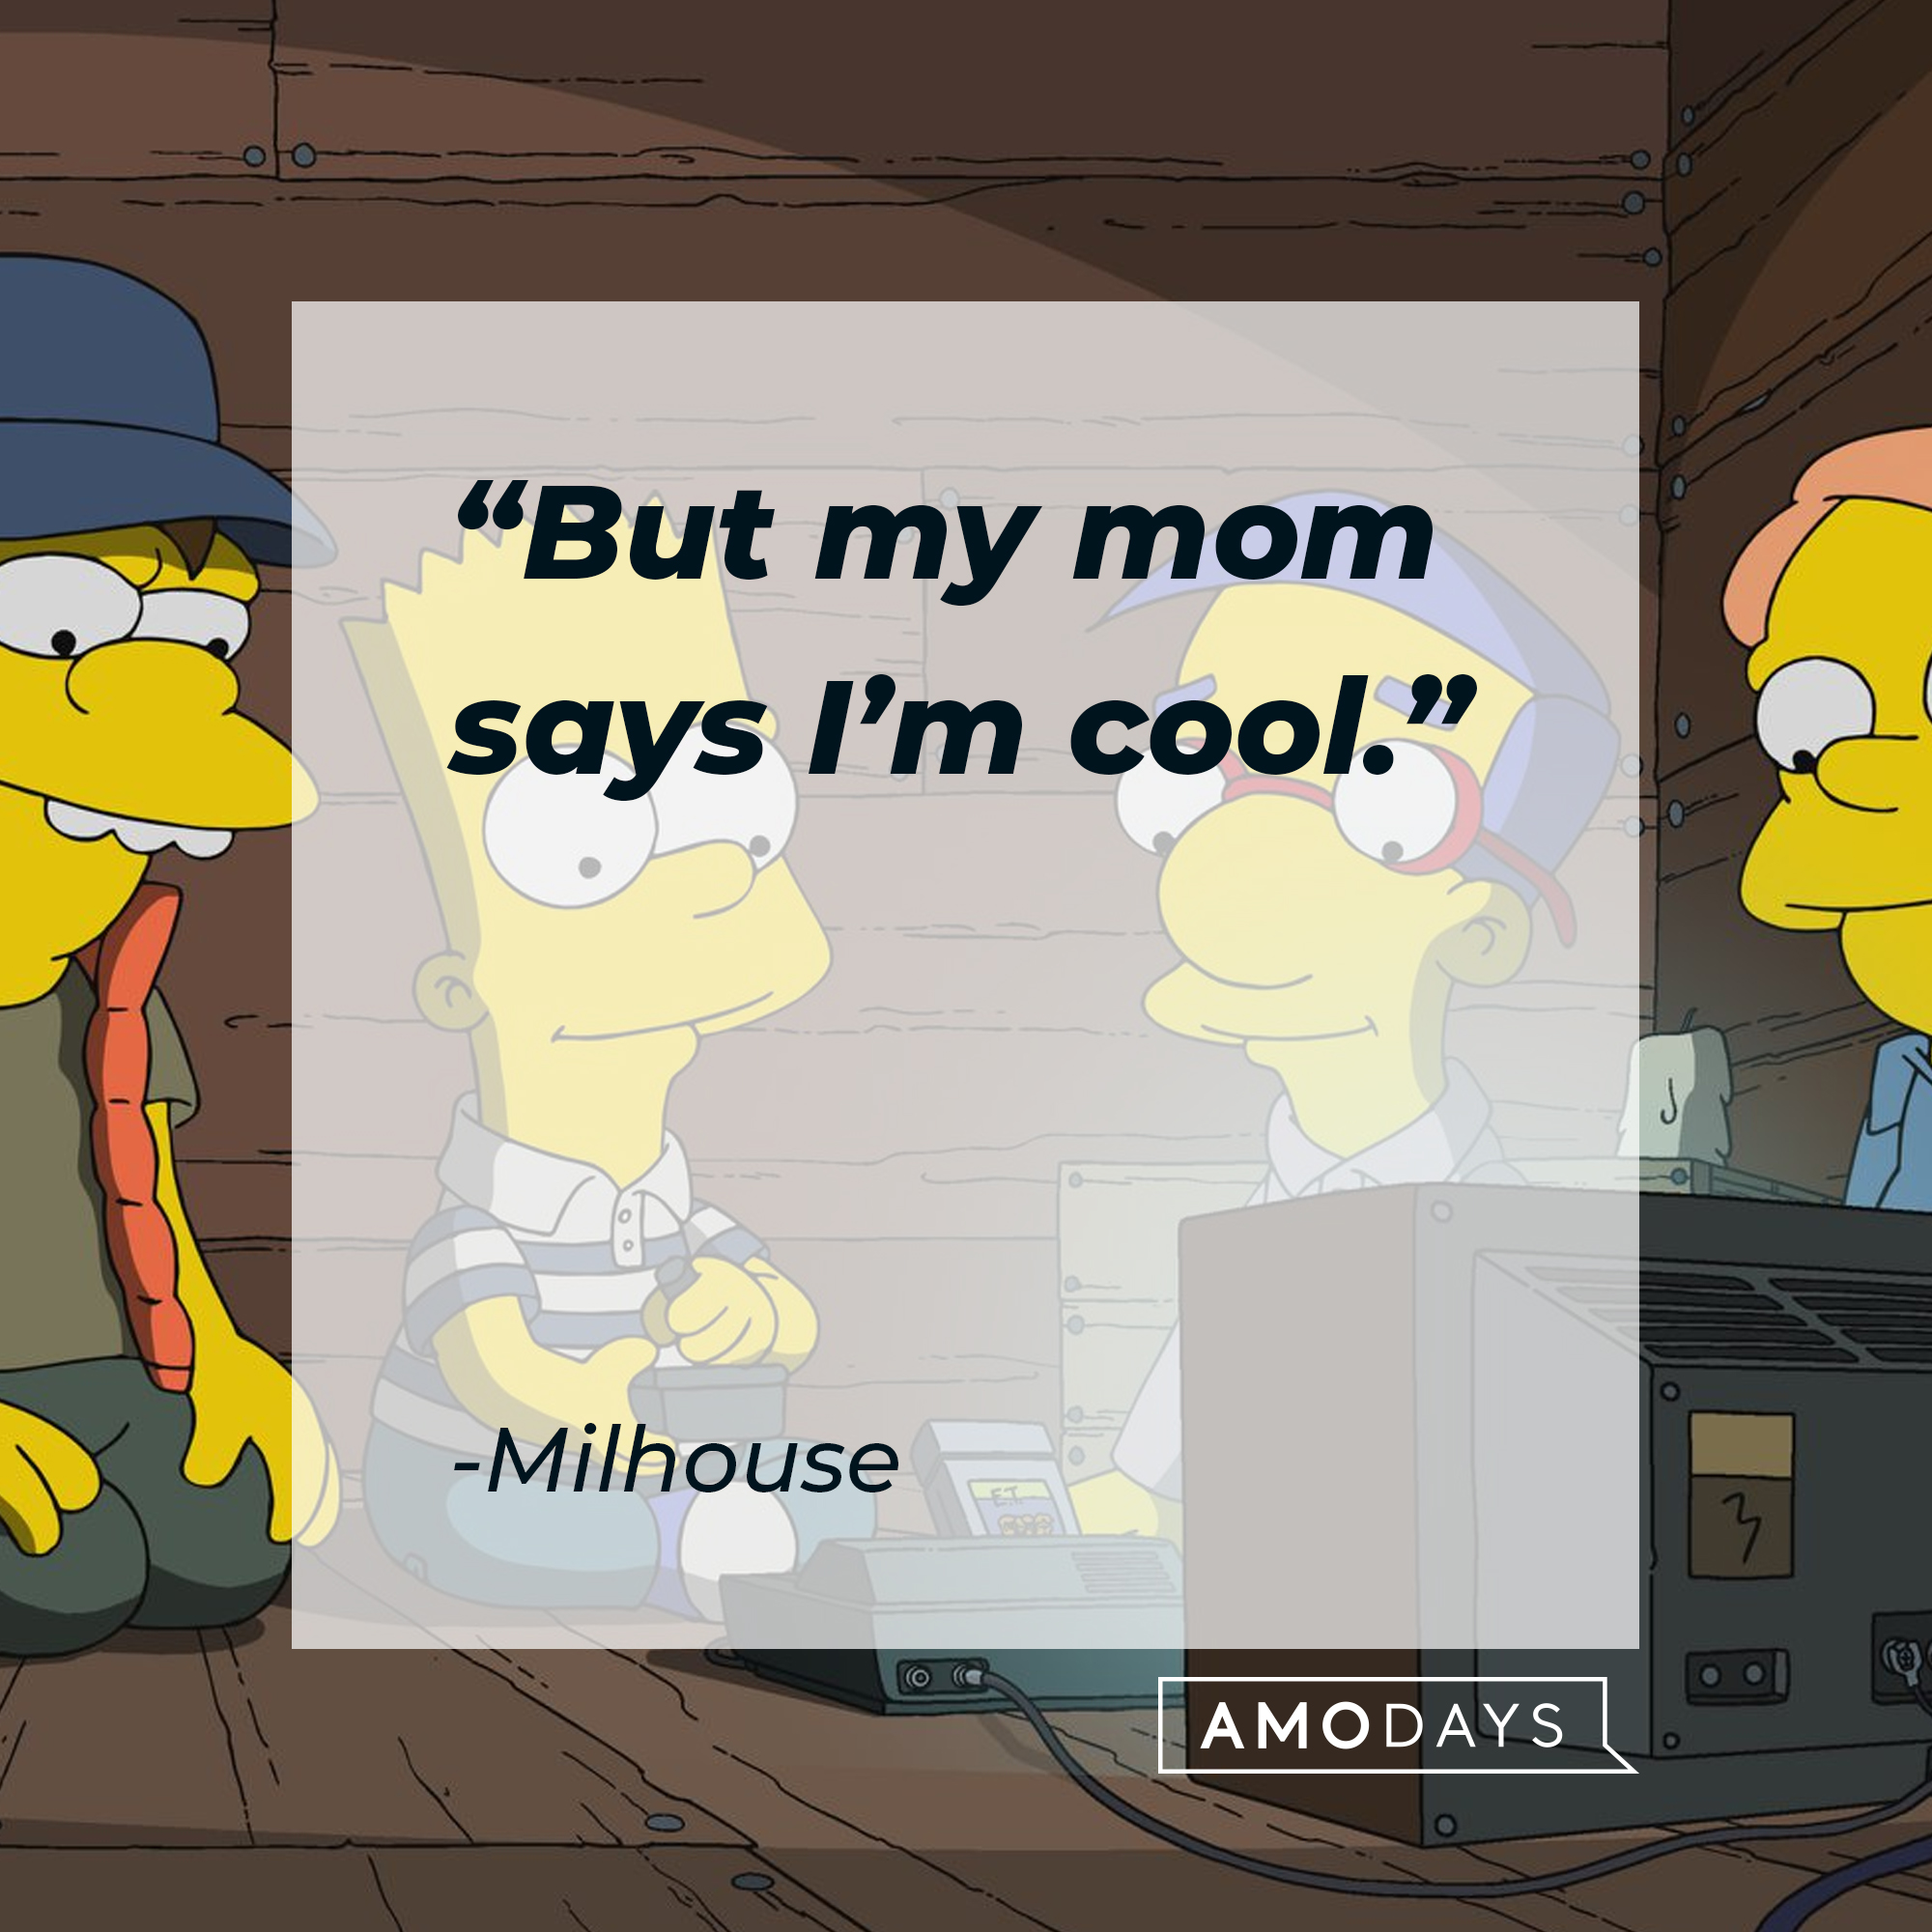 Nelson Mandela Muntz, Bart Simpson, and Milhouse, with Milhouse's quote: “But my mom says I’m cool.” | Source: facebook.com/TheSimpsons